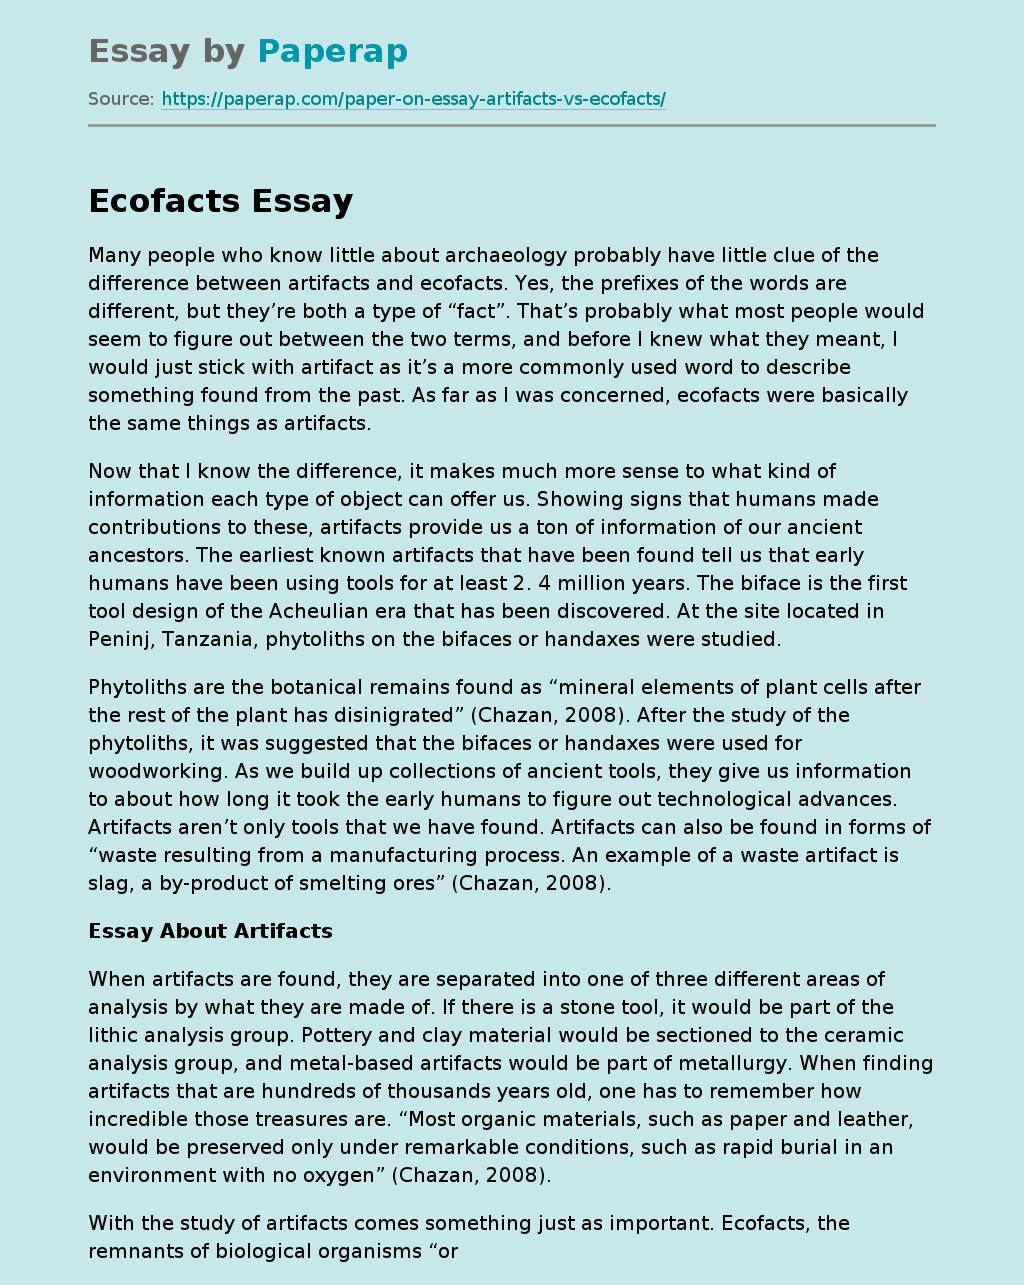 Essay About Artifacts